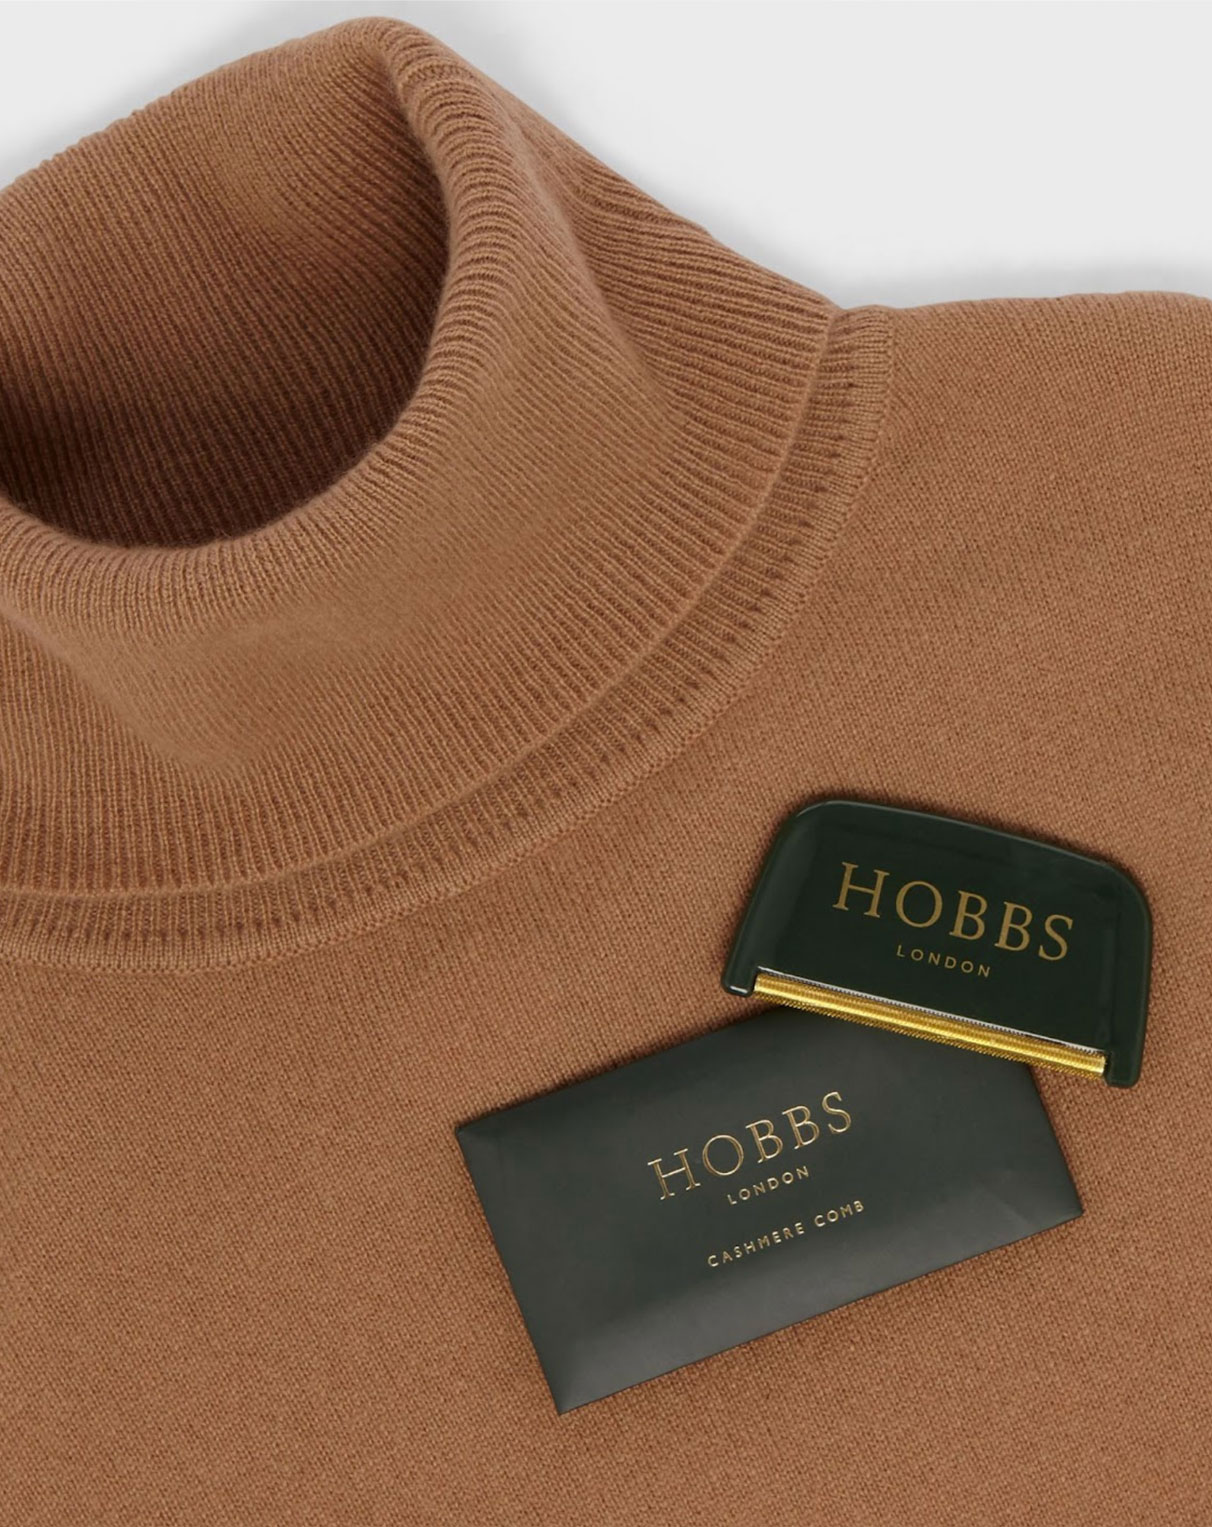 A Hobbs cashmere comb sits on top of a camel cashmere roll neck jumper.